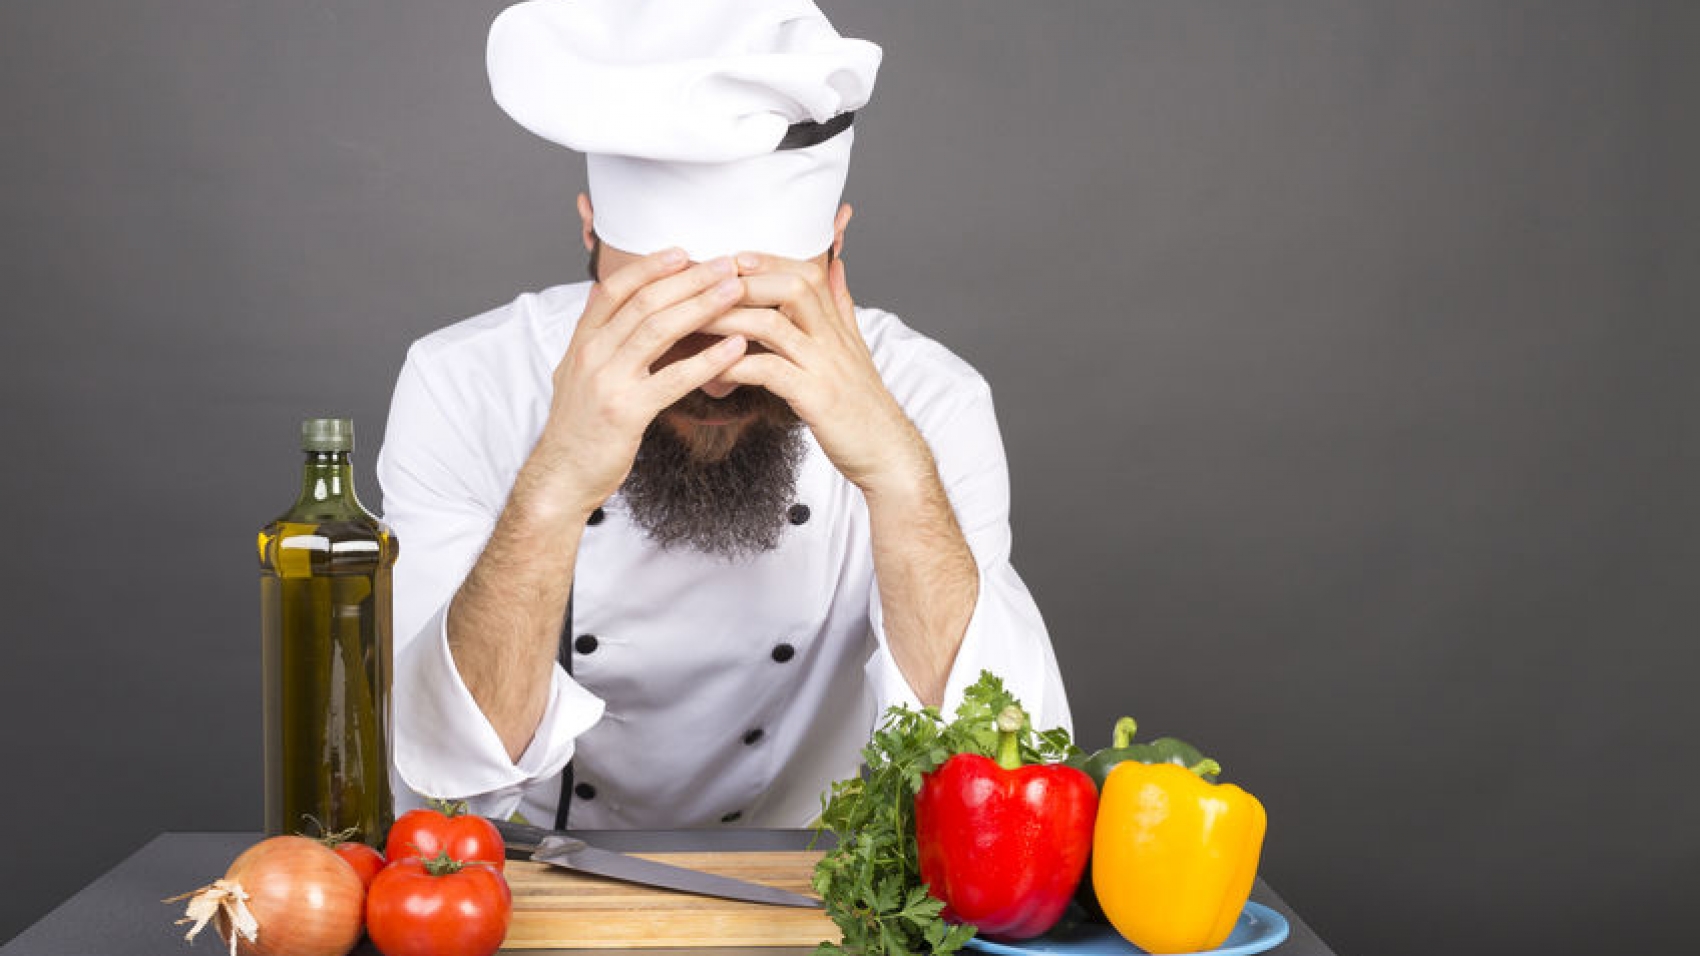 Young chef covers face with hands, having problems, isolated on gray